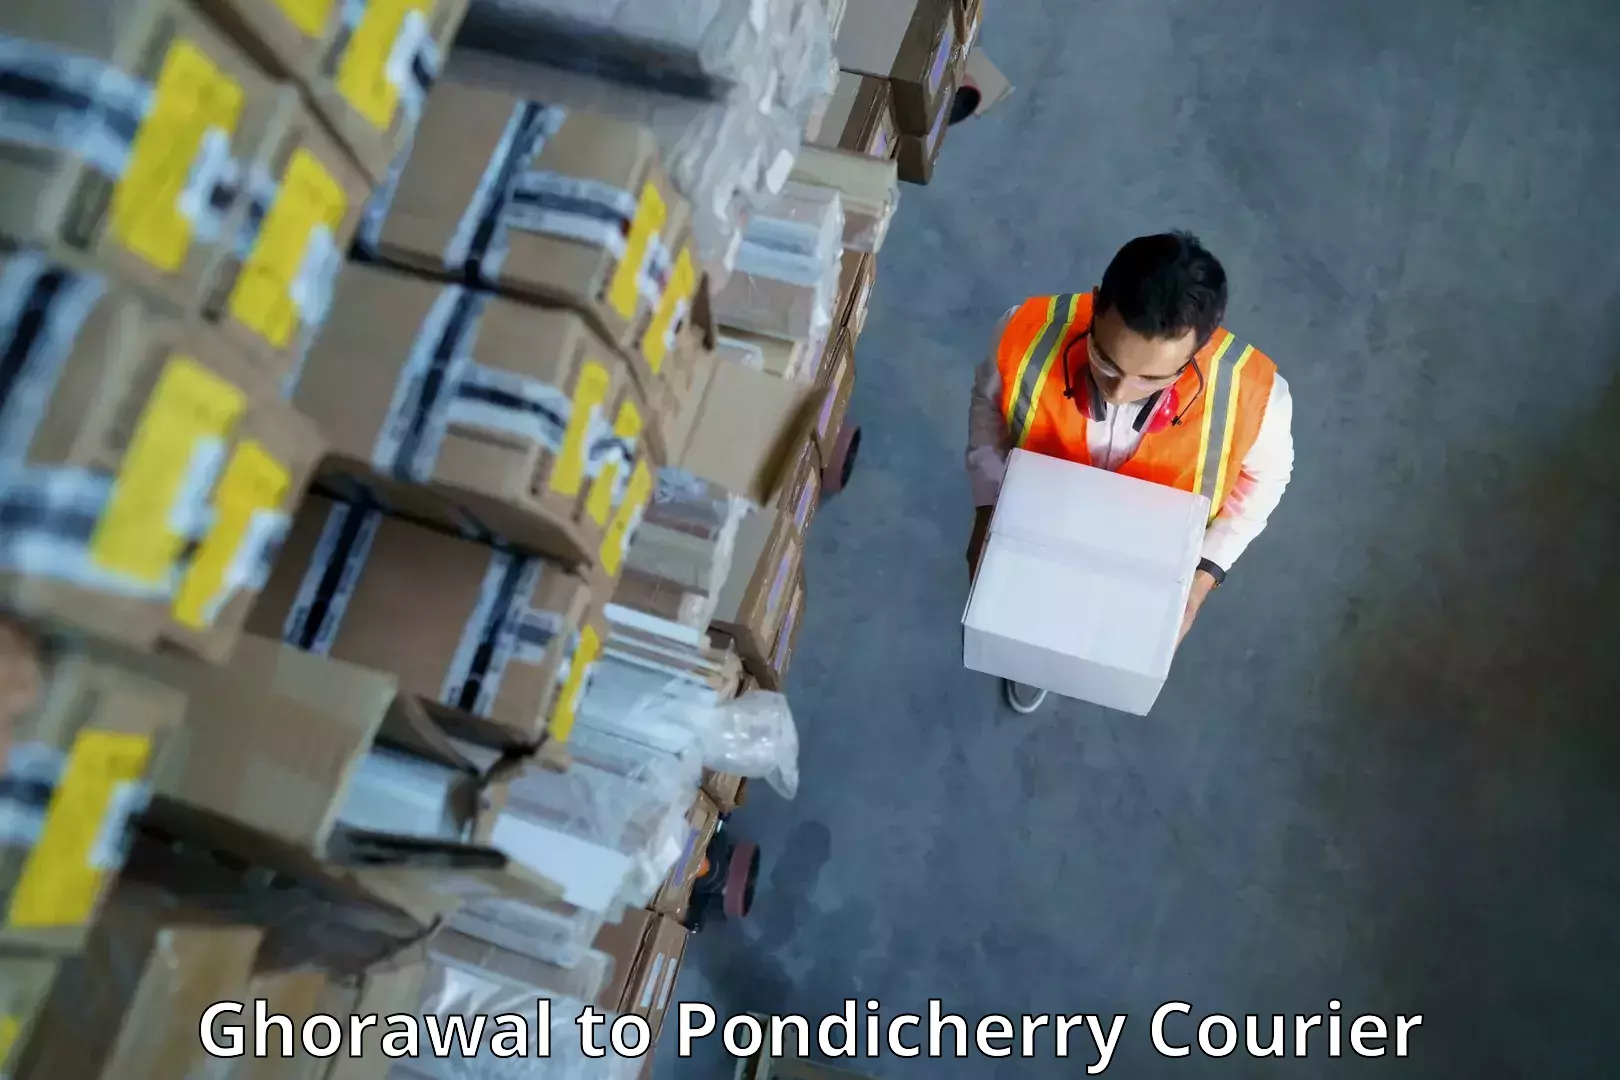 Premium courier services in Ghorawal to Pondicherry